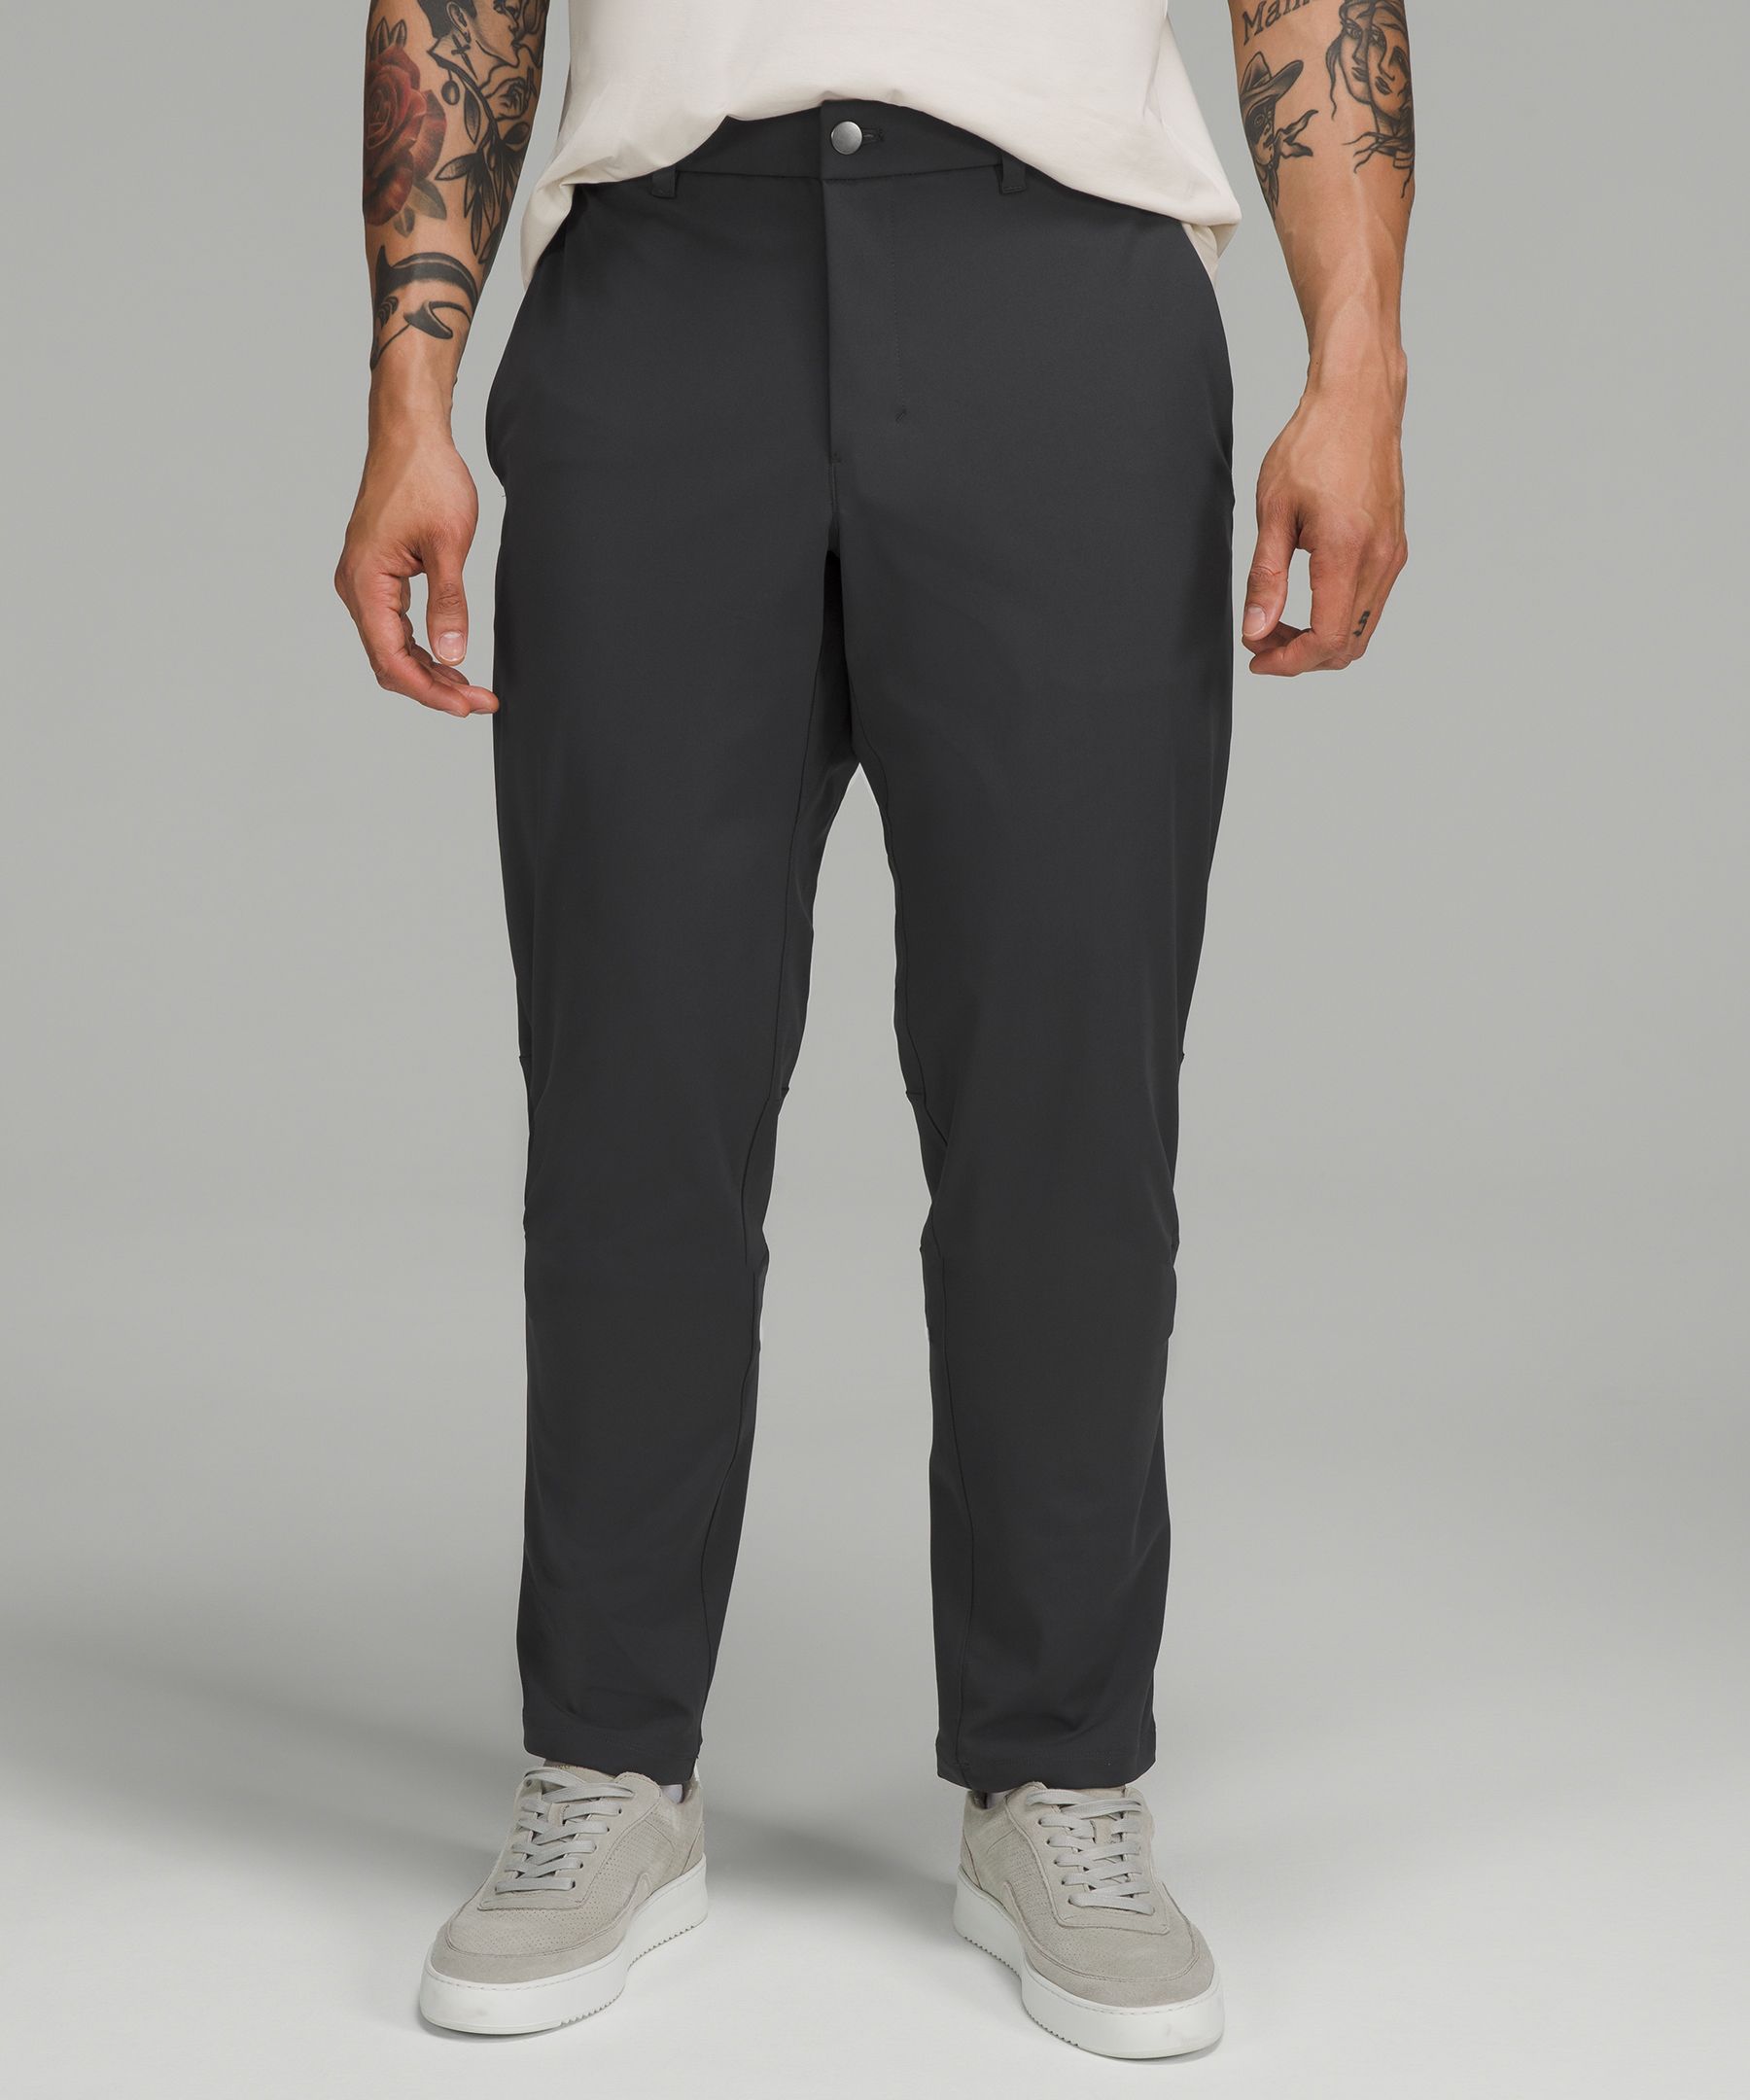 Lululemon Commission Pant Relaxed Reviews 2019